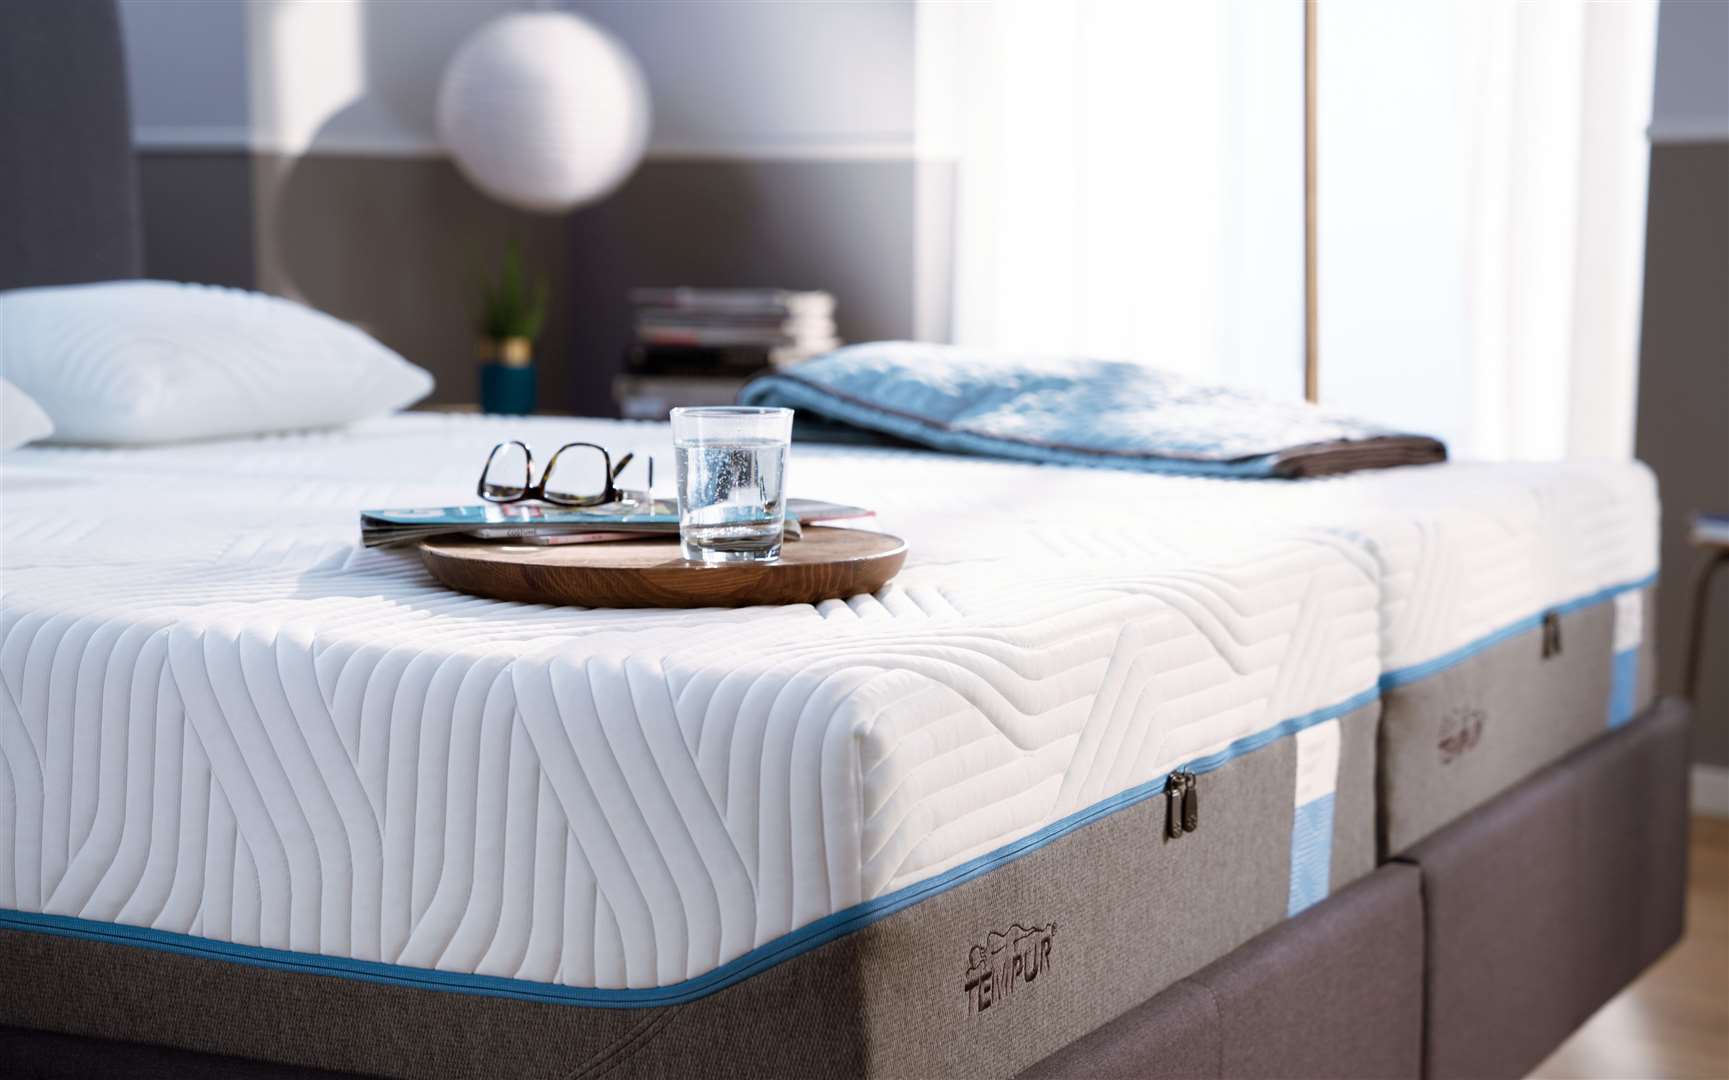 TEMPUR®'s softest mattress, the Cloud provides exceptional comfort and support